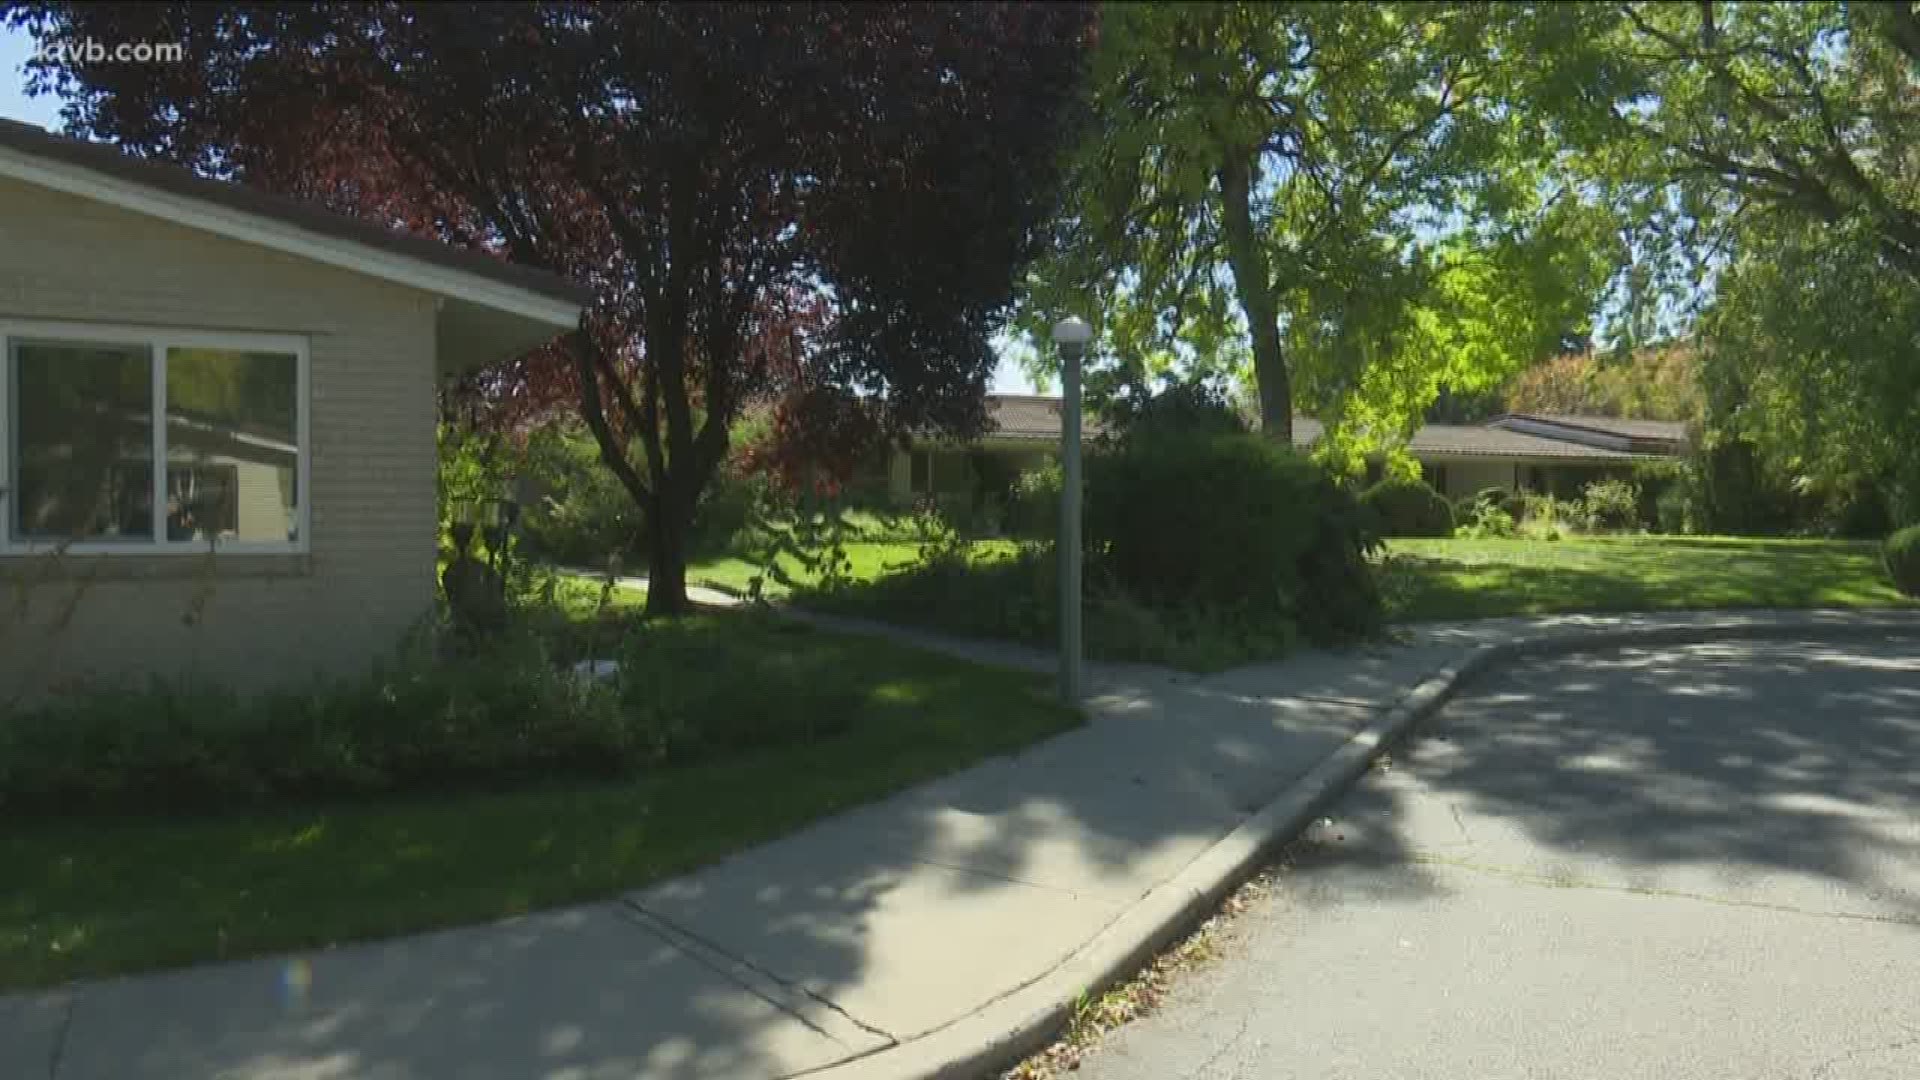 For some residents, a potential rezone of land near the intersection of Boise Avenue and Protest Road could force them from their current affordable housing.